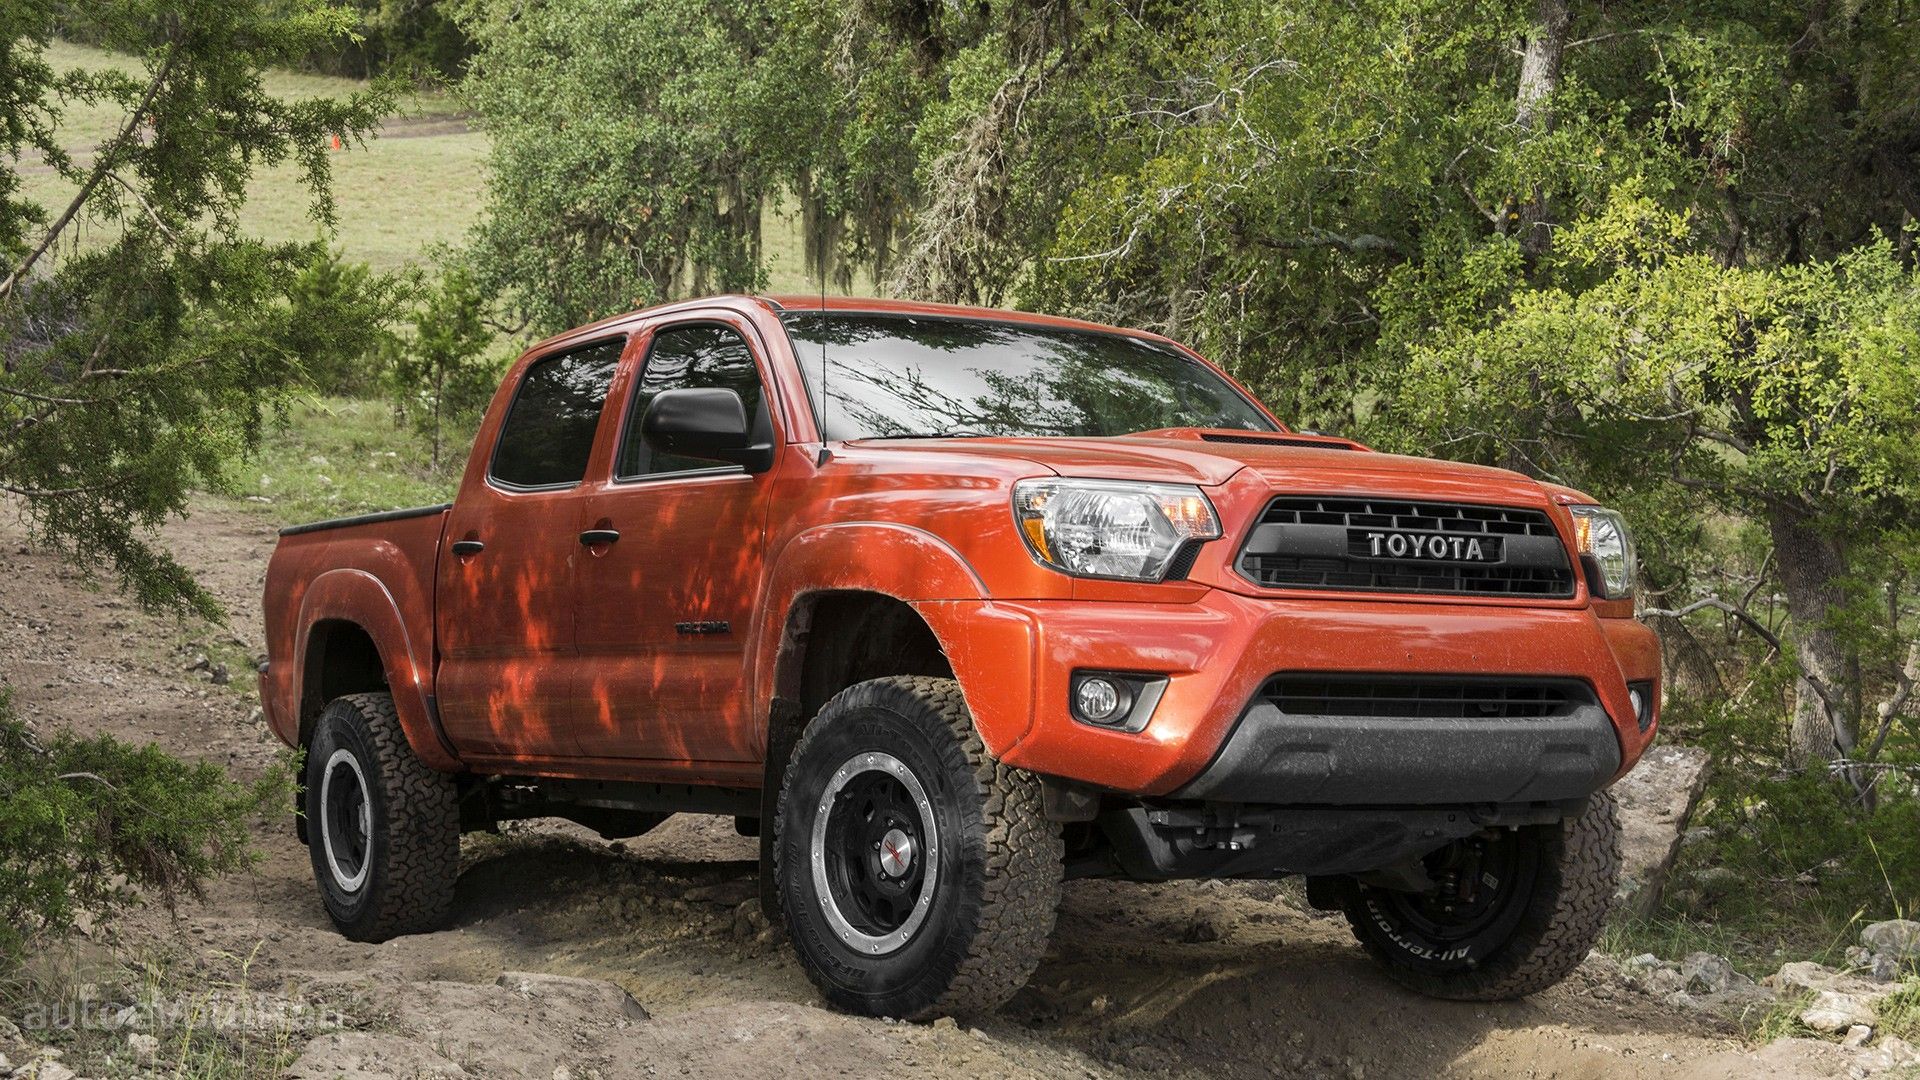 2015-toyota-tacoma-trd-pro-hd-wallpapers-conquers-jurassic-world-96580_4.jpg